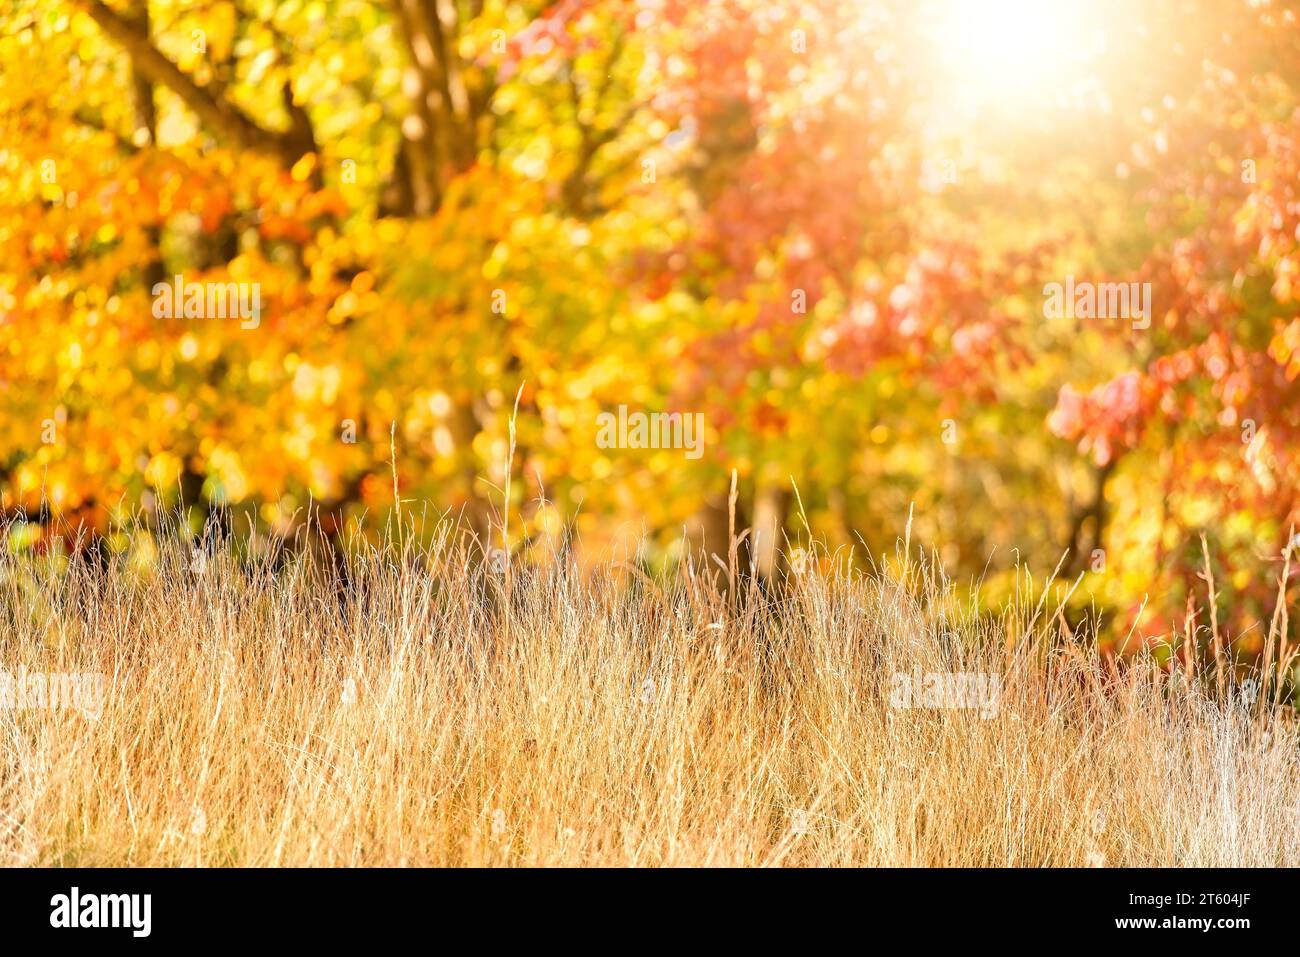 Warm golden Autumn colors in a meadow of wheat and vibrant trees. Stock Photo